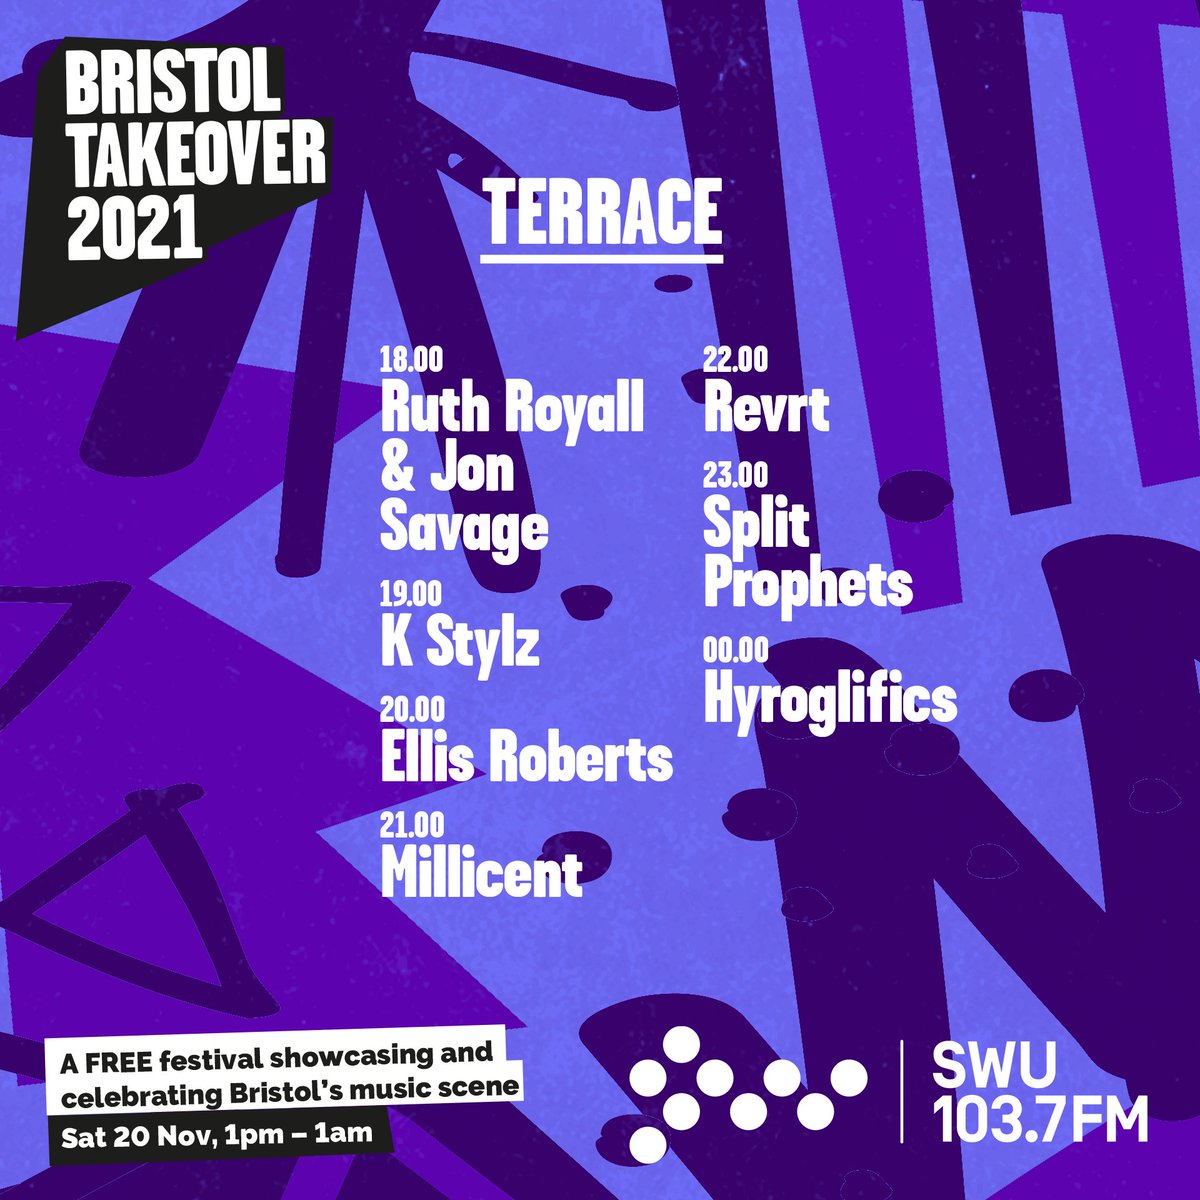 Bristol Takeover is back TOMORROW! Here are approx set times for all 3 stages - set your alarm for your faves & plan when to discover something new! Don't forget all stages also live streamed on Vimeo. Full details & watch links 👉 buff.ly/325WsG7